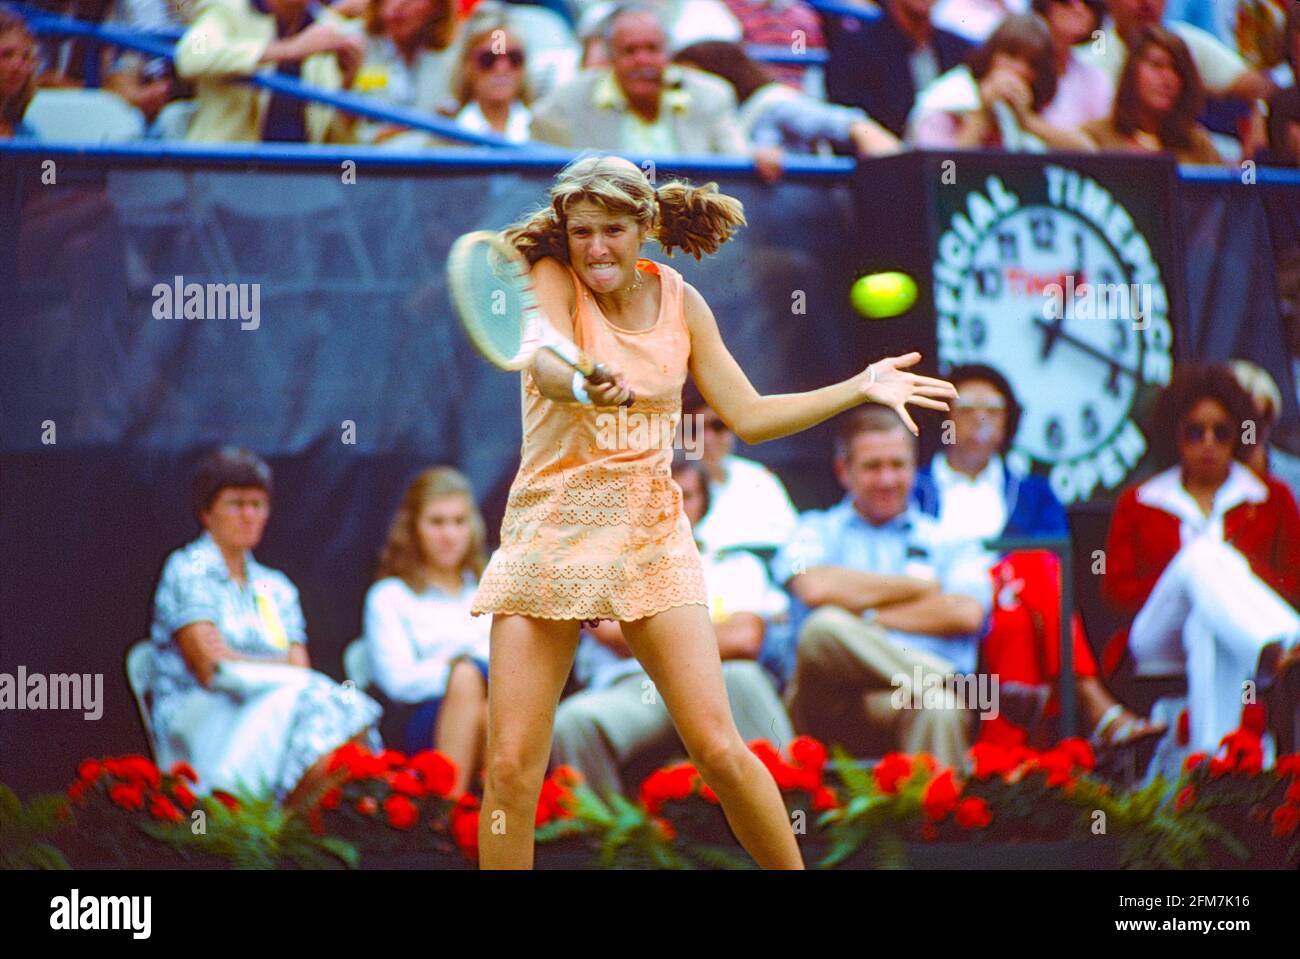 Tracy Austin (USA) wins the 1979 US Open Tennis Championships Stock Photo